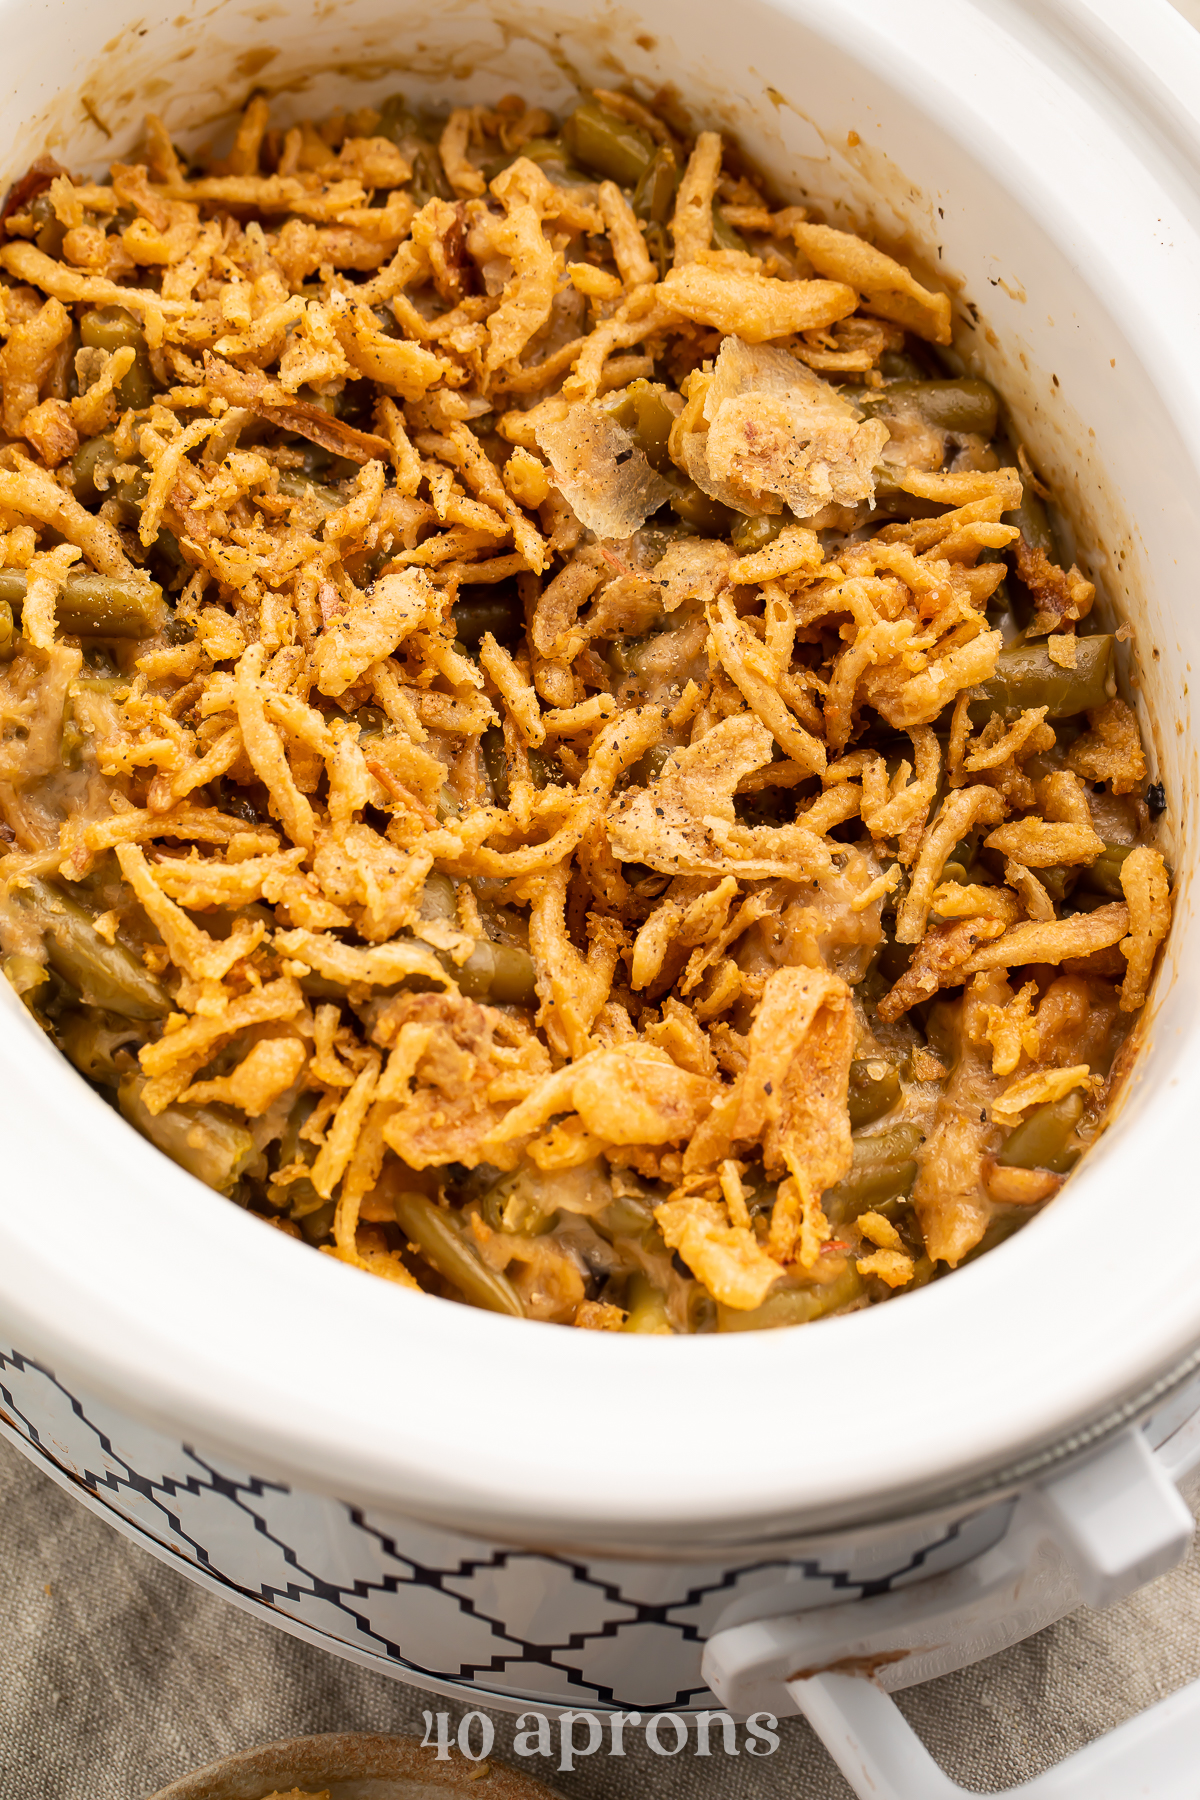 An overhead view of an angled oval Crockpot containing green bean casserole topped with crispy fried onions.